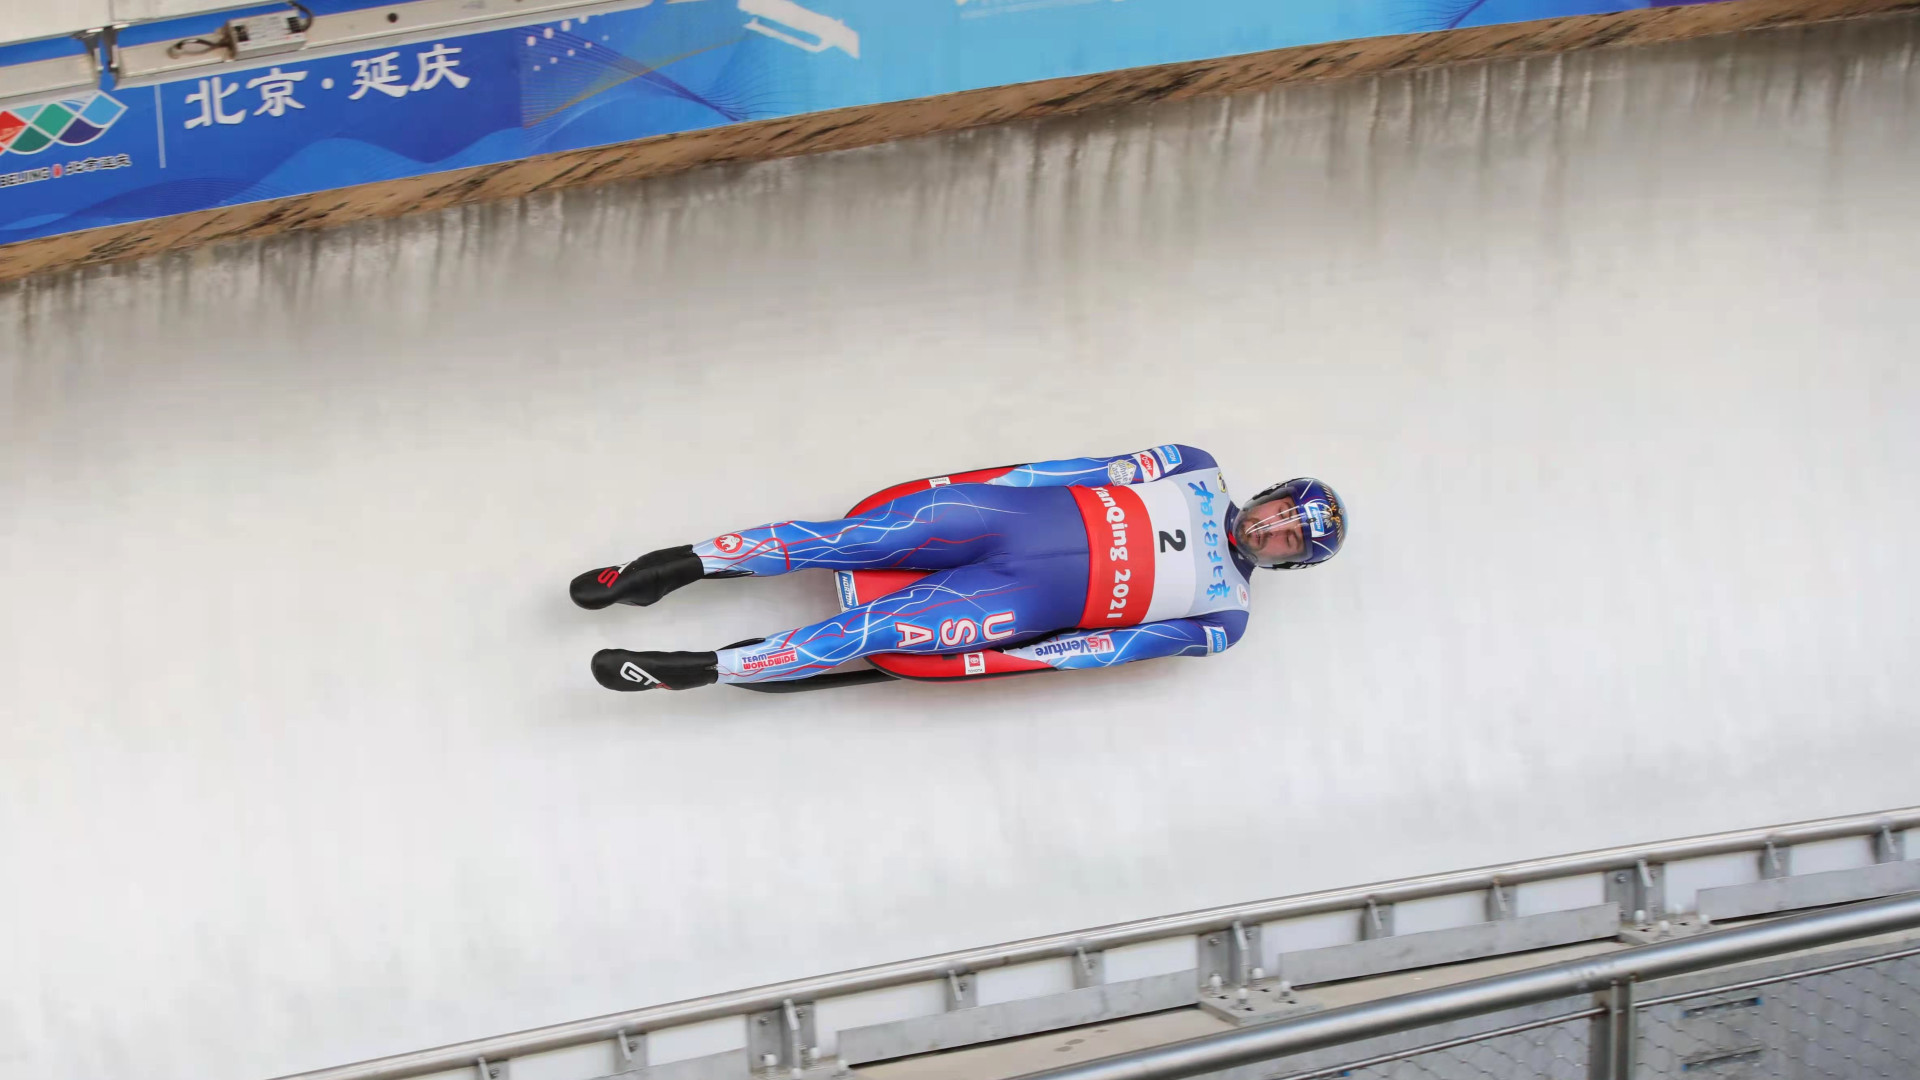 luge at the 2022 winter olympics